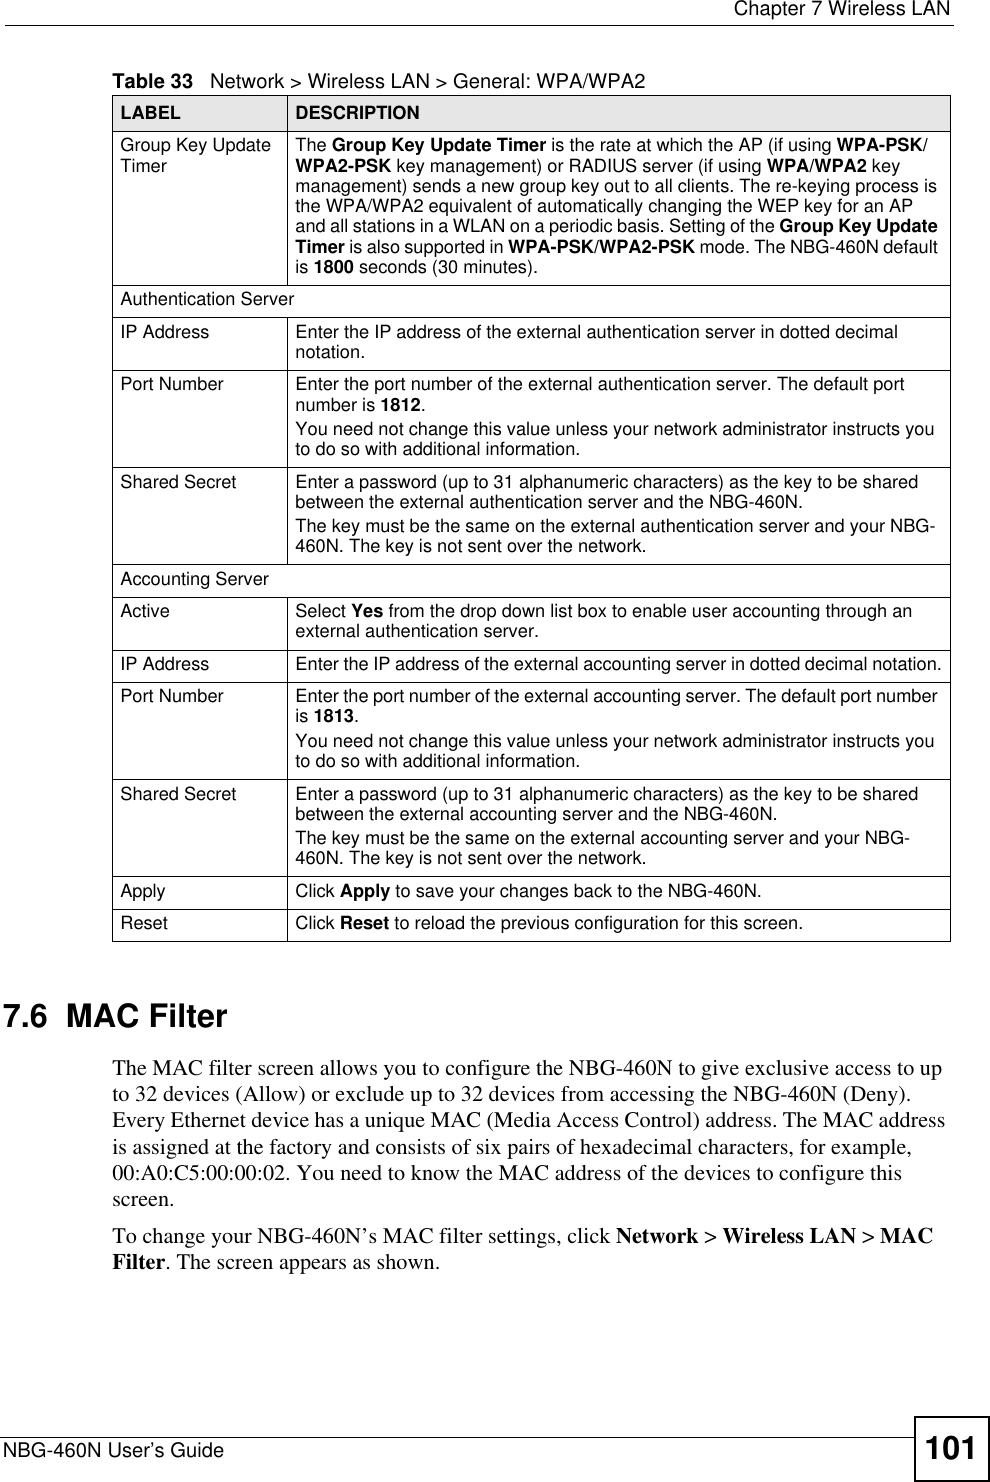  Chapter 7 Wireless LANNBG-460N User’s Guide 1017.6  MAC FilterThe MAC filter screen allows you to configure the NBG-460N to give exclusive access to up to 32 devices (Allow) or exclude up to 32 devices from accessing the NBG-460N (Deny). Every Ethernet device has a unique MAC (Media Access Control) address. The MAC address is assigned at the factory and consists of six pairs of hexadecimal characters, for example, 00:A0:C5:00:00:02. You need to know the MAC address of the devices to configure this screen.To change your NBG-460N’s MAC filter settings, click Network &gt; Wireless LAN &gt; MACFilter. The screen appears as shown.Group Key Update Timer The Group Key Update Timer is the rate at which the AP (if using WPA-PSK/WPA2-PSK key management) or RADIUS server (if using WPA/WPA2 key management) sends a new group key out to all clients. The re-keying process is the WPA/WPA2 equivalent of automatically changing the WEP key for an AP and all stations in a WLAN on a periodic basis. Setting of the Group Key Update Timer is also supported in WPA-PSK/WPA2-PSK mode. The NBG-460N default is 1800 seconds (30 minutes).Authentication ServerIP Address Enter the IP address of the external authentication server in dotted decimal notation.Port Number Enter the port number of the external authentication server. The default port number is 1812.You need not change this value unless your network administrator instructs you to do so with additional information. Shared Secret Enter a password (up to 31 alphanumeric characters) as the key to be shared between the external authentication server and the NBG-460N.The key must be the same on the external authentication server and your NBG-460N. The key is not sent over the network. Accounting ServerActive Select Yes from the drop down list box to enable user accounting through an external authentication server.IP Address Enter the IP address of the external accounting server in dotted decimal notation.Port Number Enter the port number of the external accounting server. The default port number is 1813.You need not change this value unless your network administrator instructs you to do so with additional information. Shared Secret Enter a password (up to 31 alphanumeric characters) as the key to be shared between the external accounting server and the NBG-460N.The key must be the same on the external accounting server and your NBG-460N. The key is not sent over the network. Apply Click Apply to save your changes back to the NBG-460N.Reset Click Reset to reload the previous configuration for this screen.Table 33   Network &gt; Wireless LAN &gt; General: WPA/WPA2LABEL DESCRIPTION